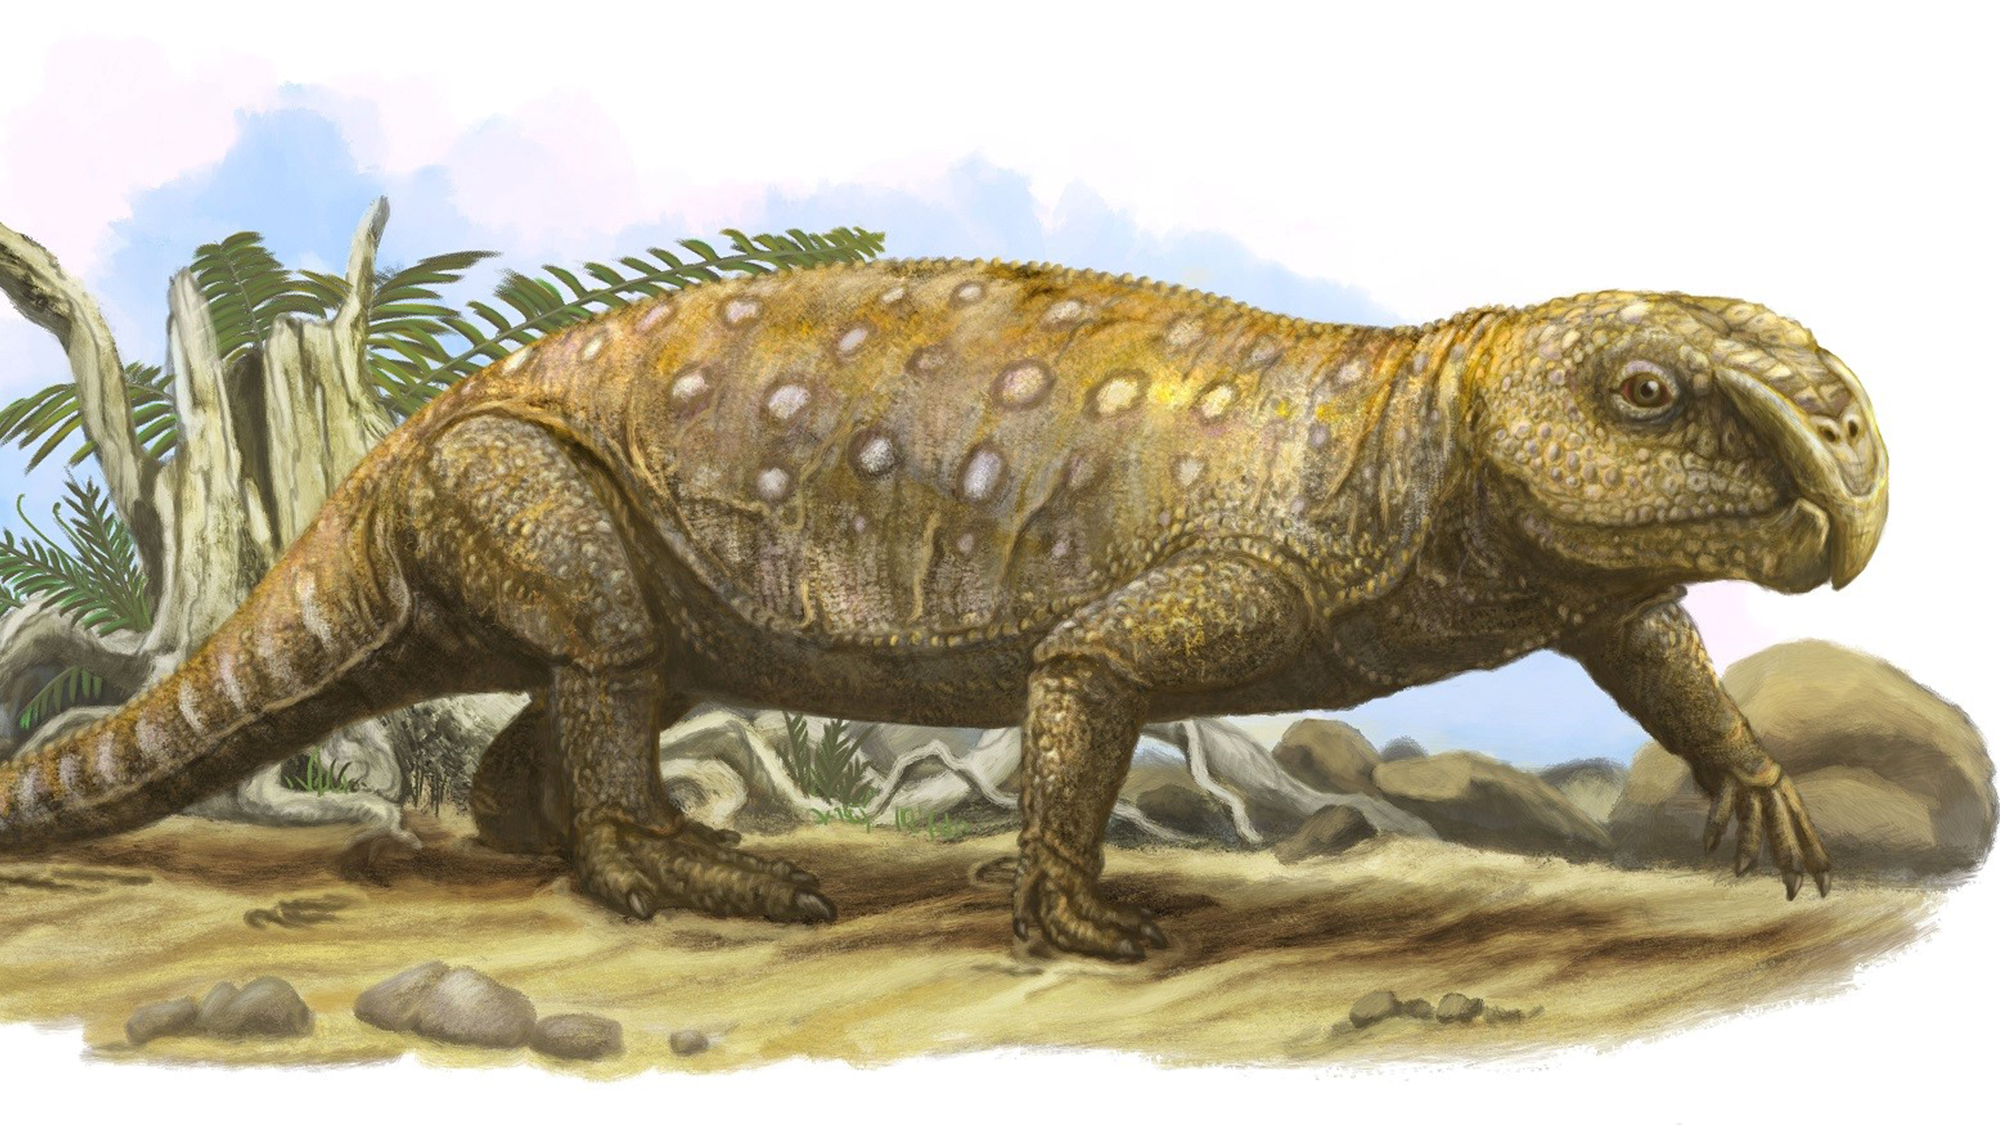 An illustration of the rhynchosaur Bentonyx from the Middle Triassic of Devon, about 245 million years ago.